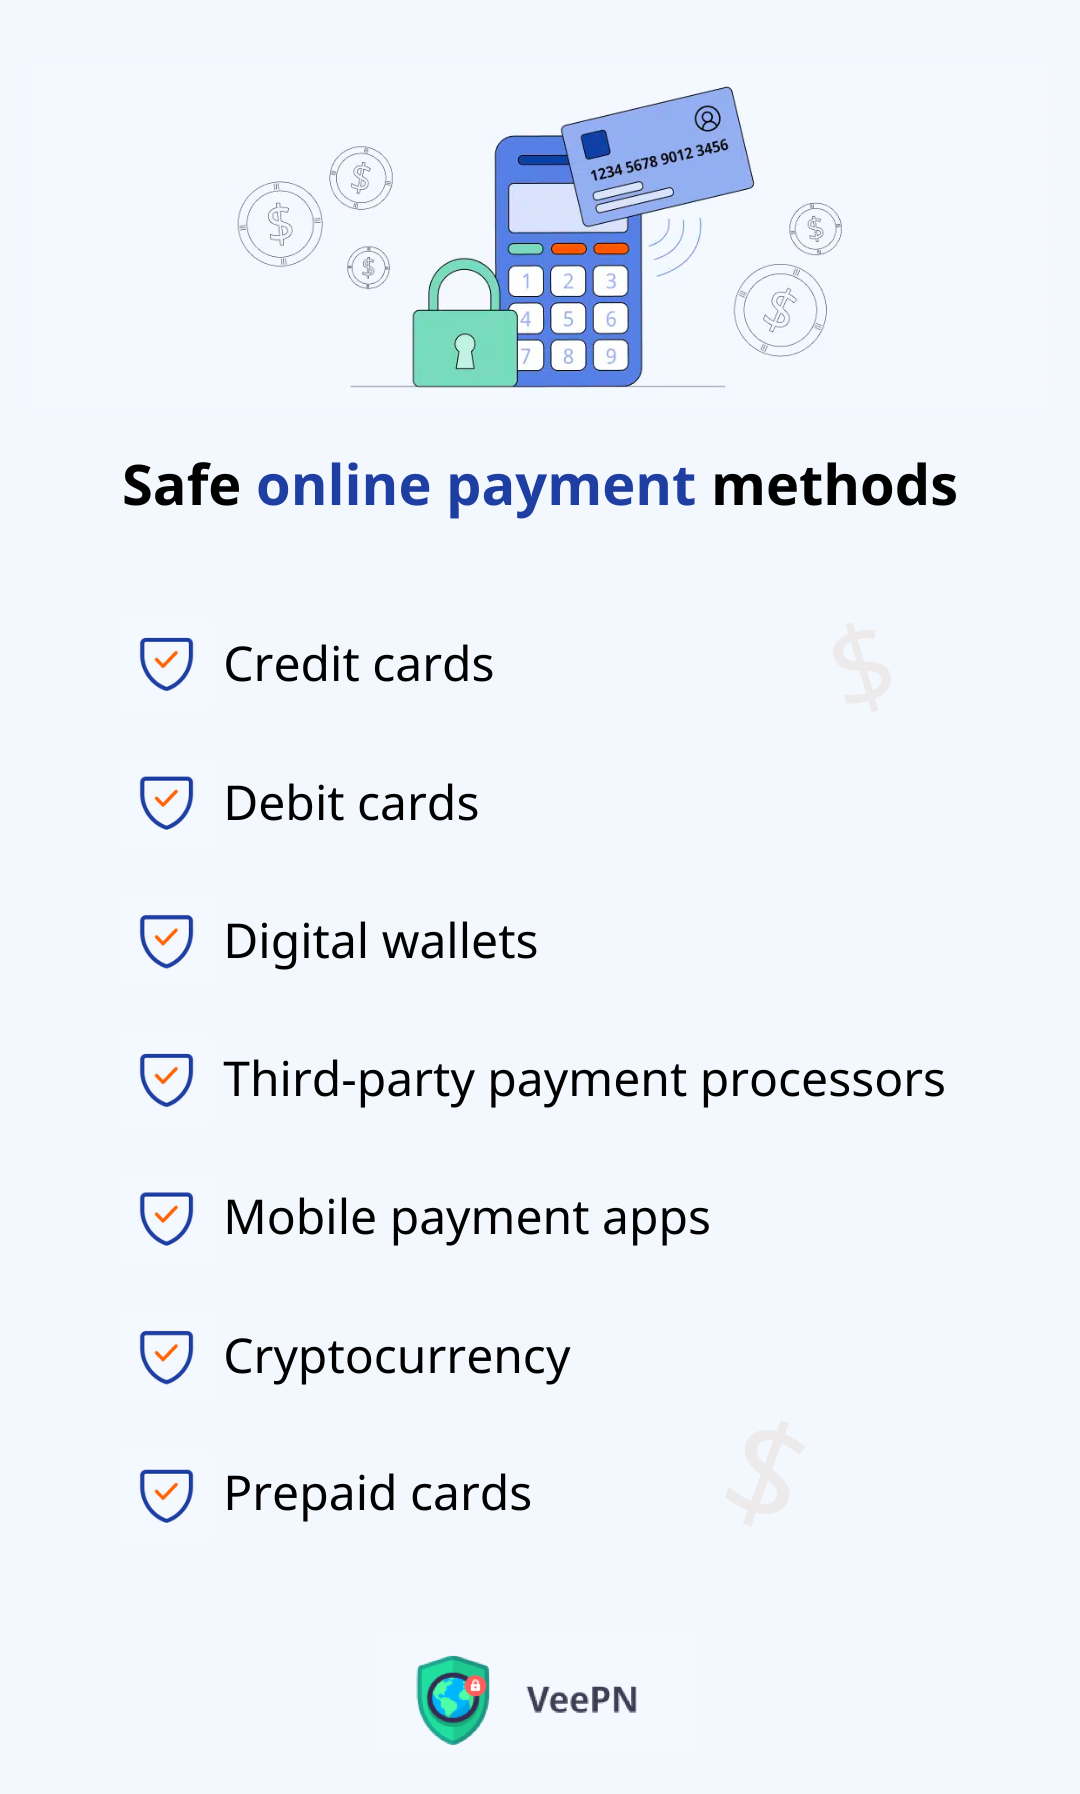 The list of secure online payment methods: Credit cards, debit cards, digital wallets, 3rd party payment processors, mobile payment apps, cryptocurrency, prepaid cards 